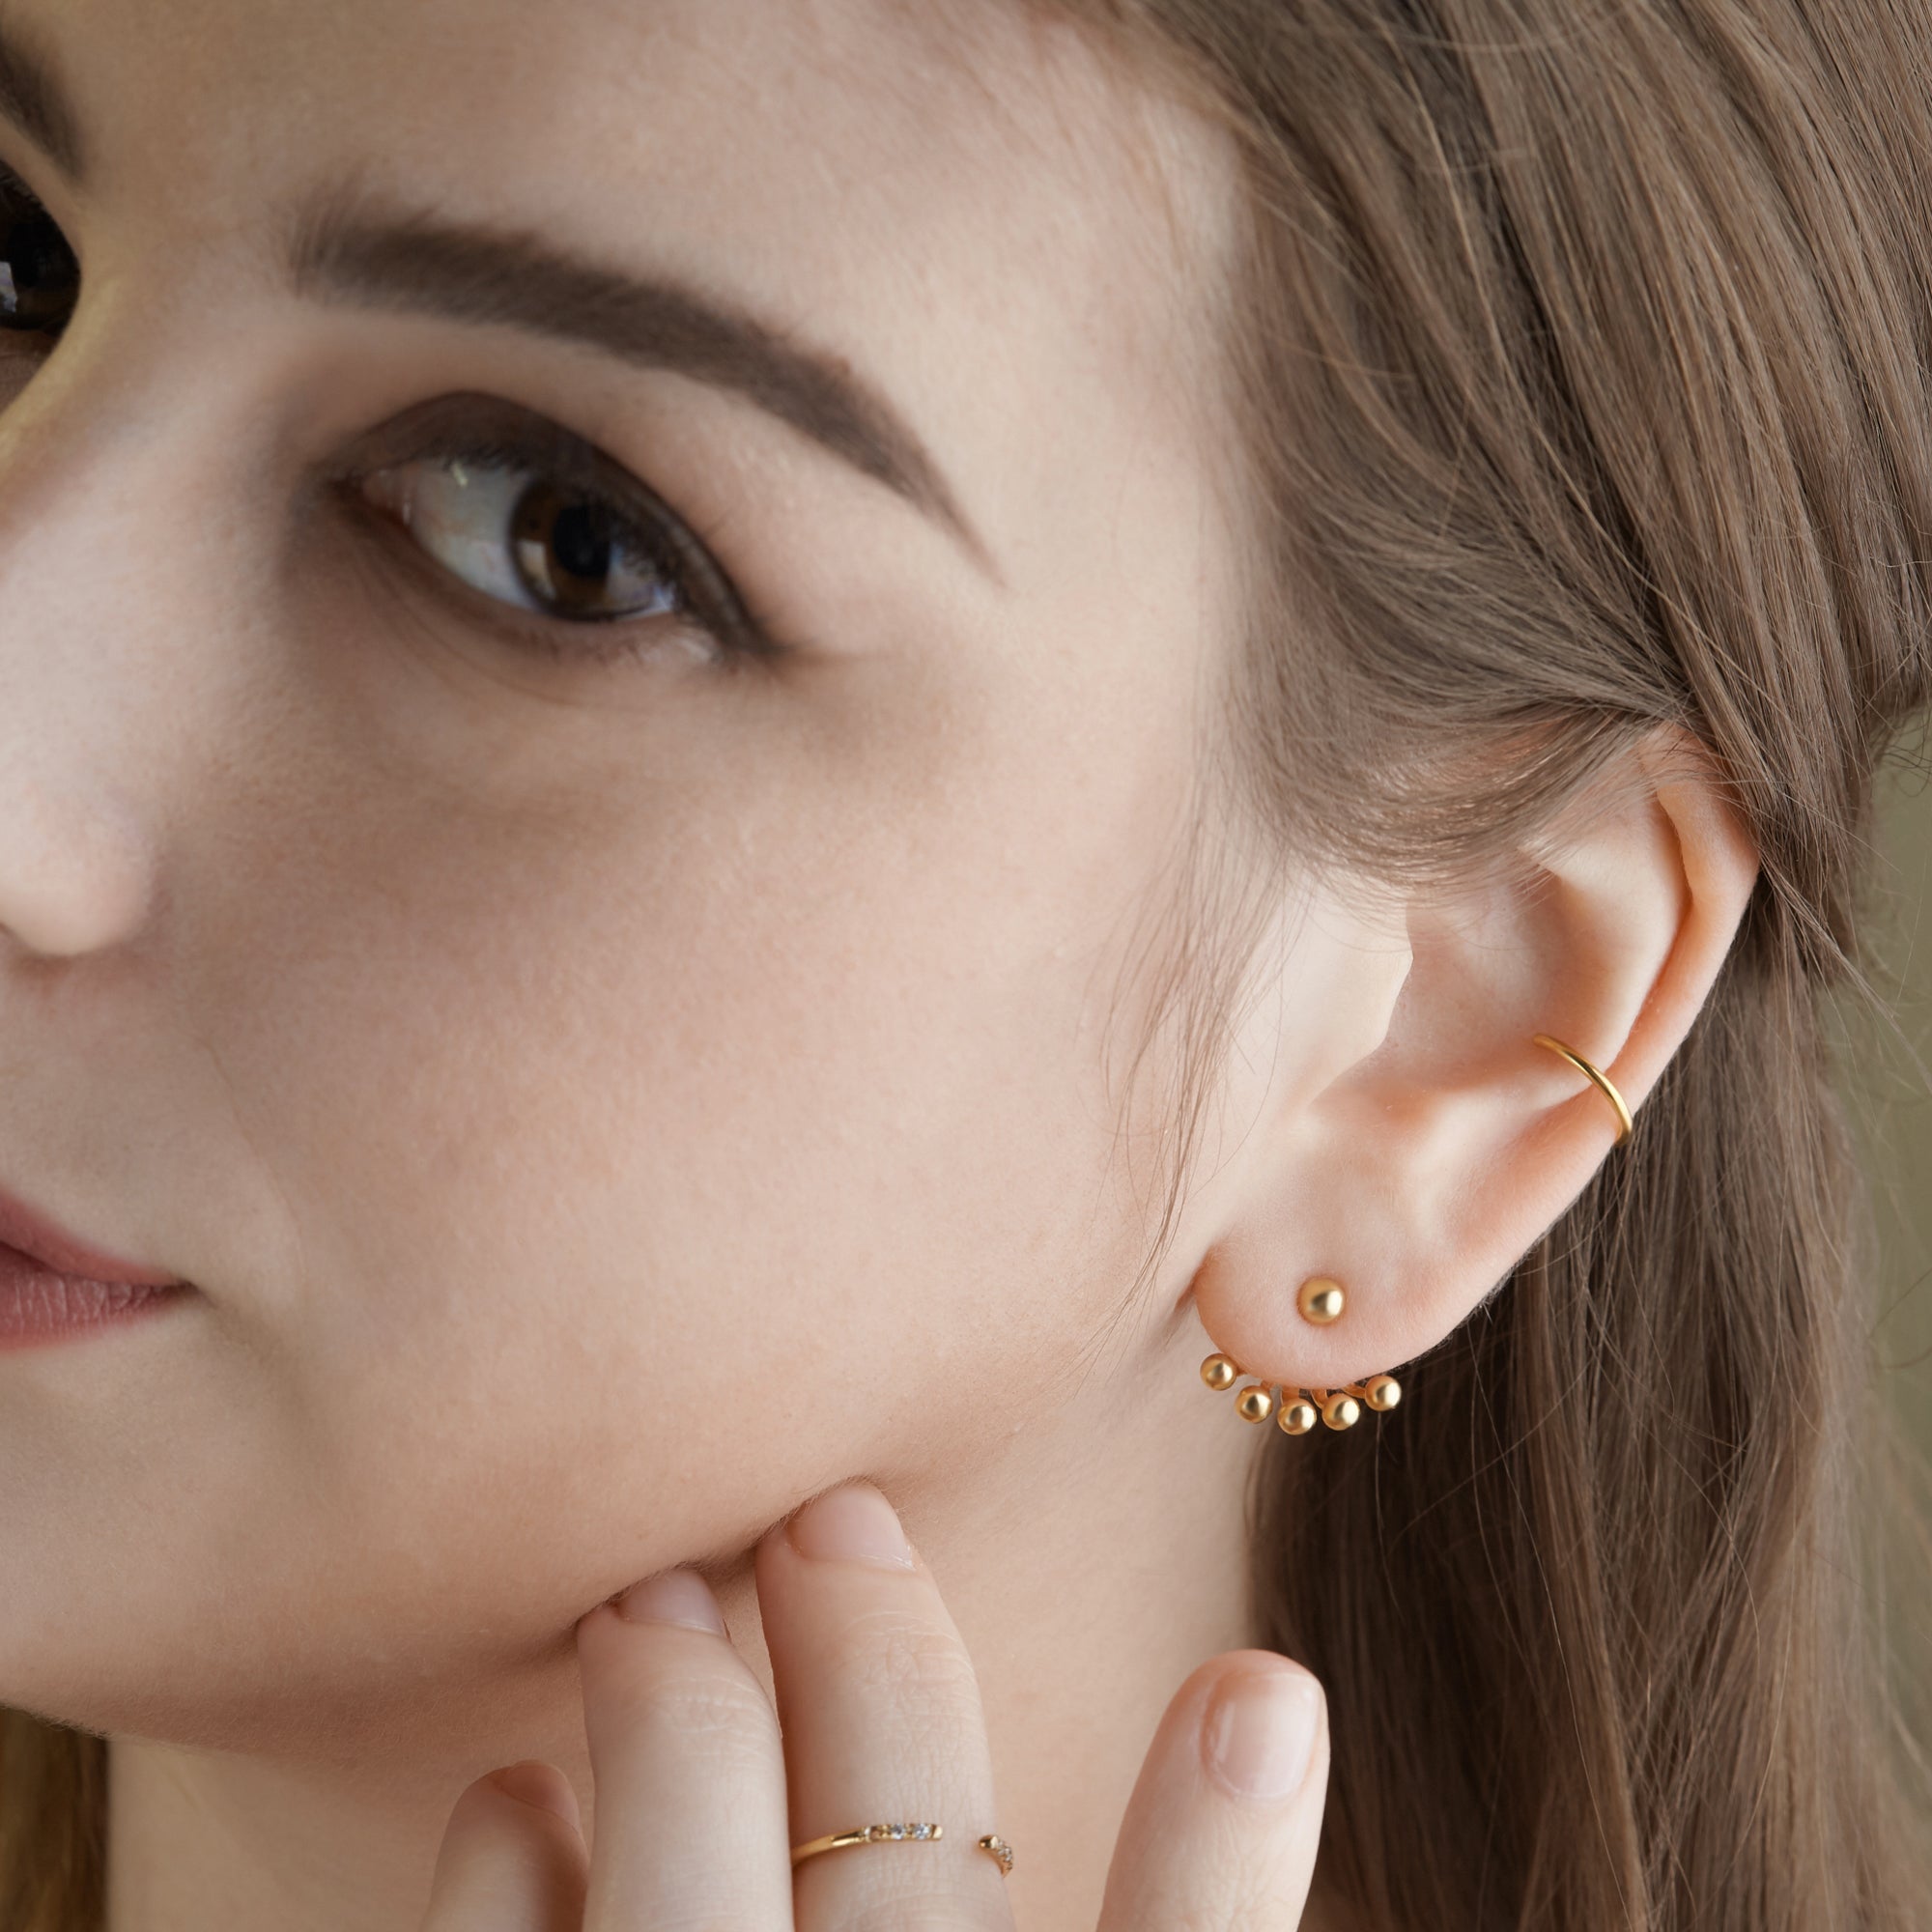 Minimal Ball-Shaped Ear Jacket Earring in Sterling Silver 
Small and dainty, perfect for everyday wear. Available in silver, gold, and rose gold. Safe for sensitive skin. - Earrings - Bijou Her -  -  - 